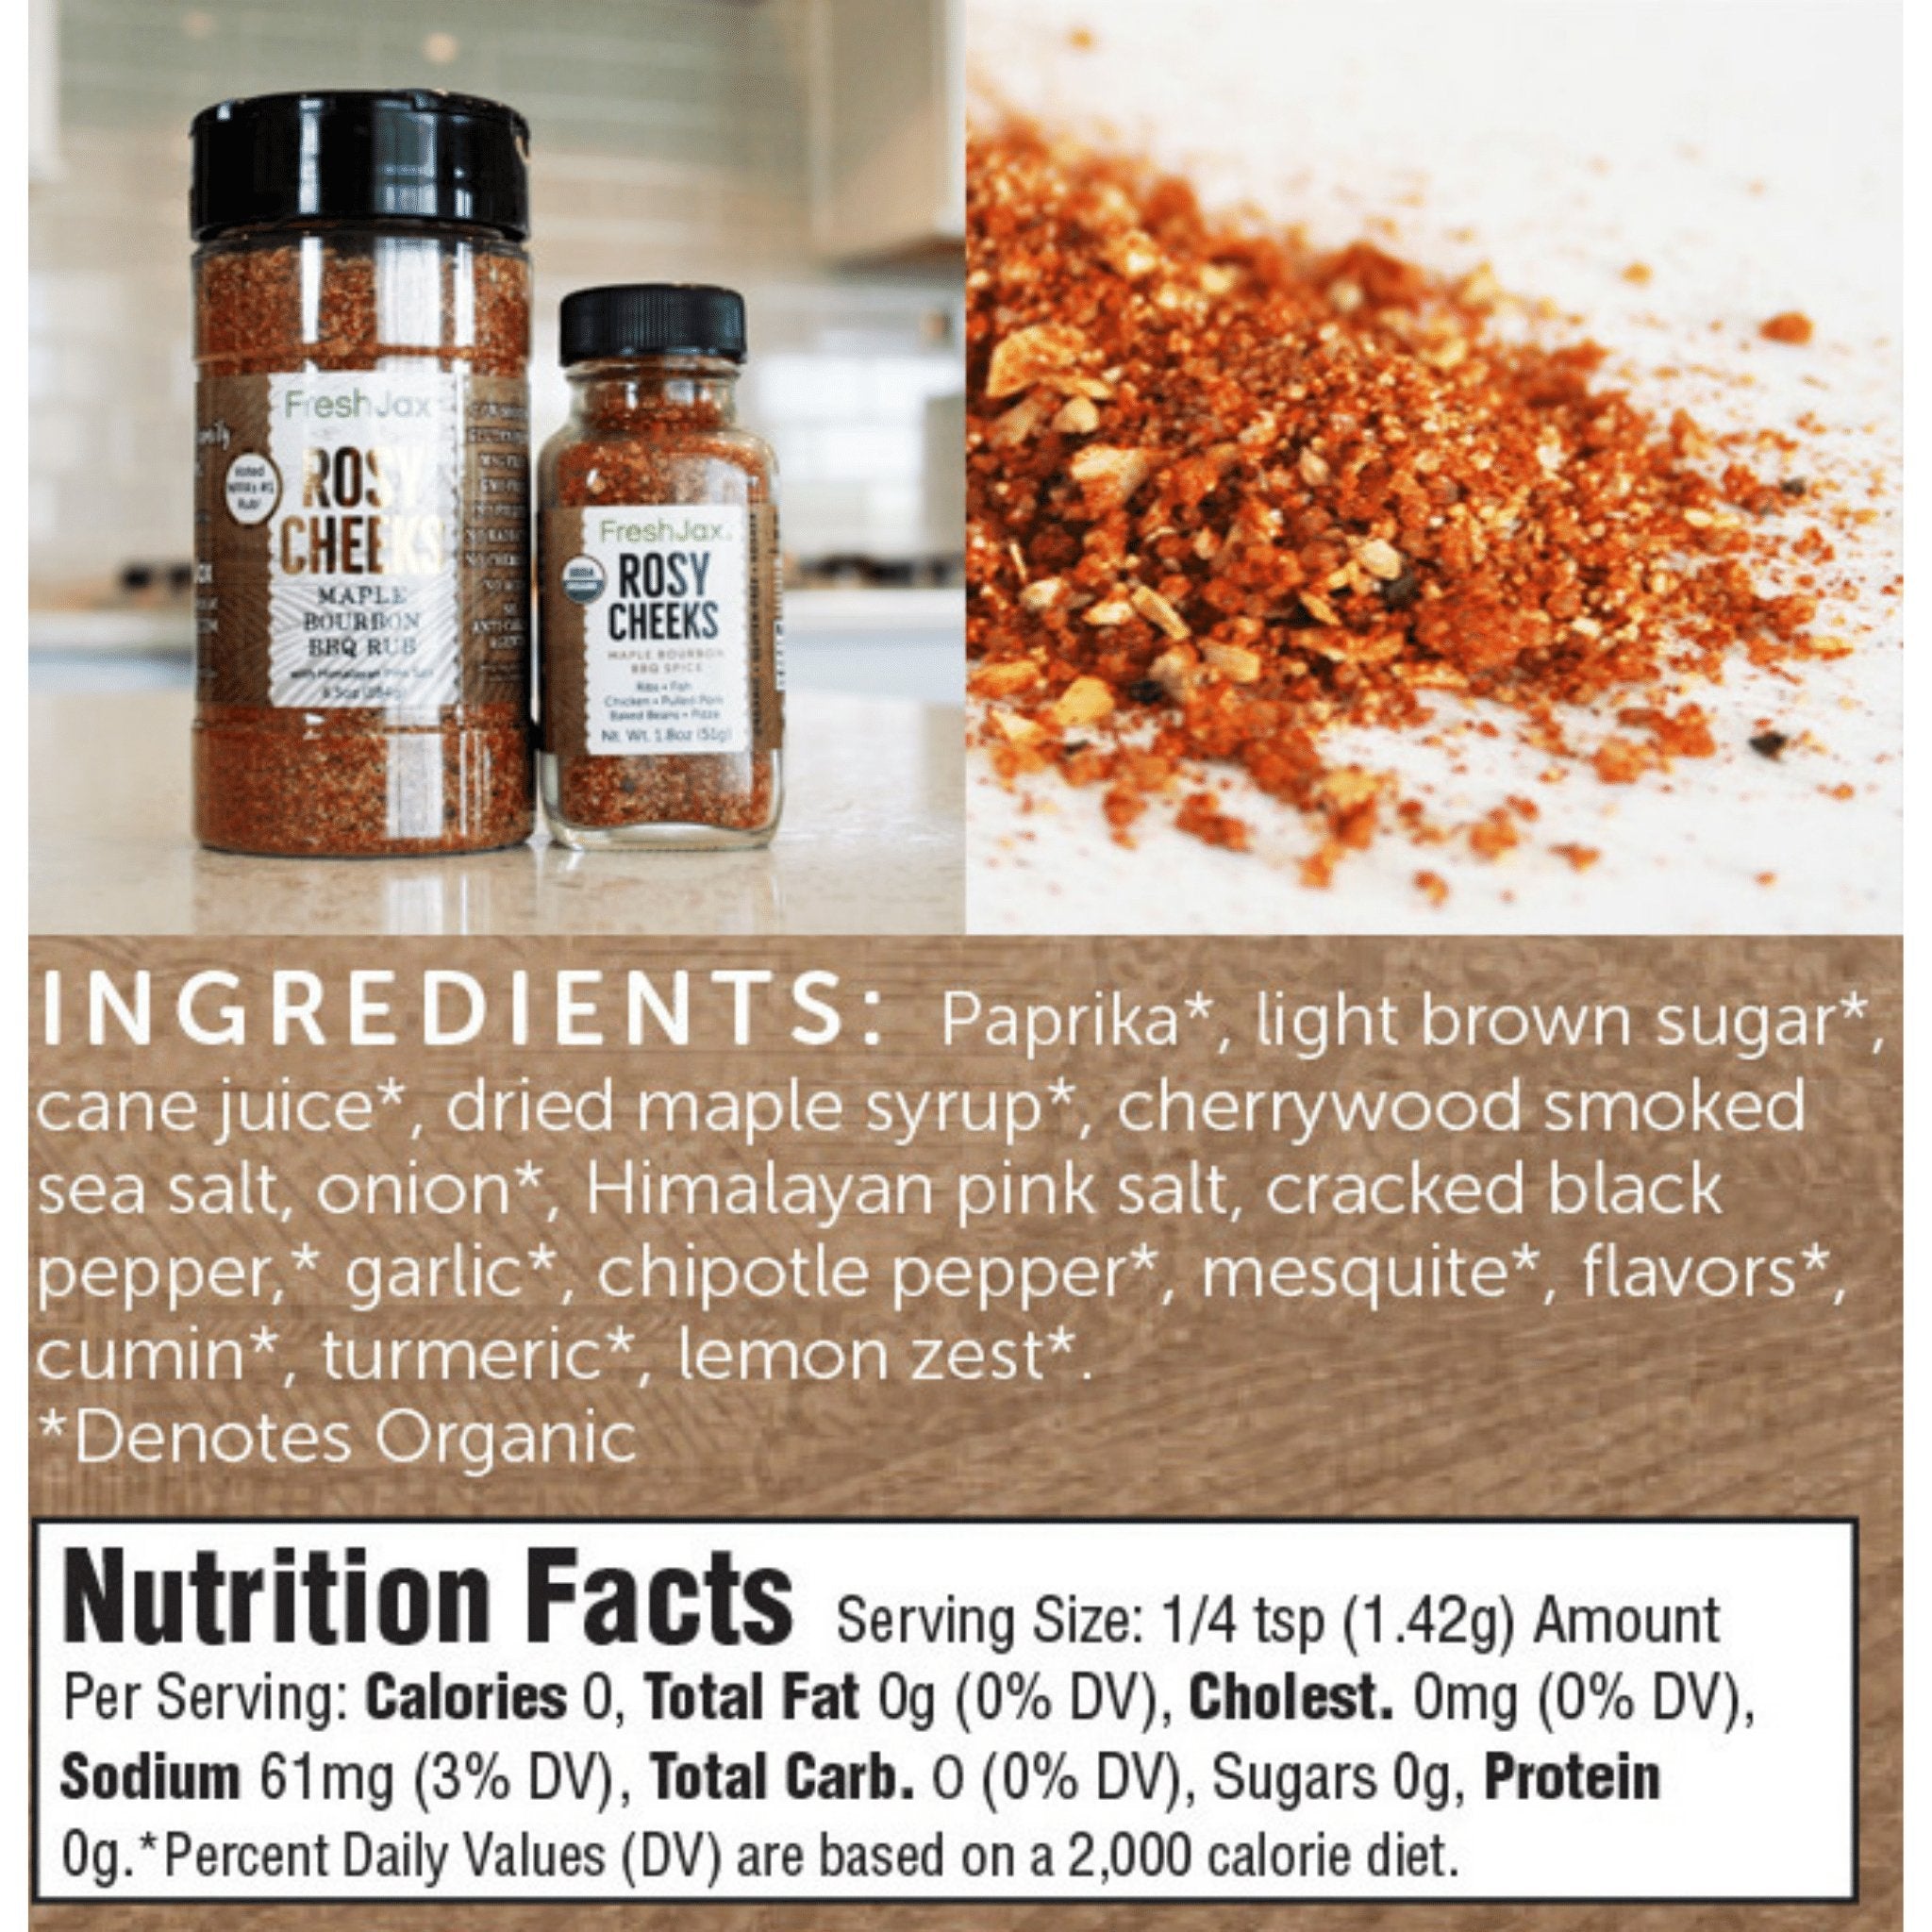 Rosy Cheeks Maple Bourbon BBQ Blend Nutritional Information and Ingredient List